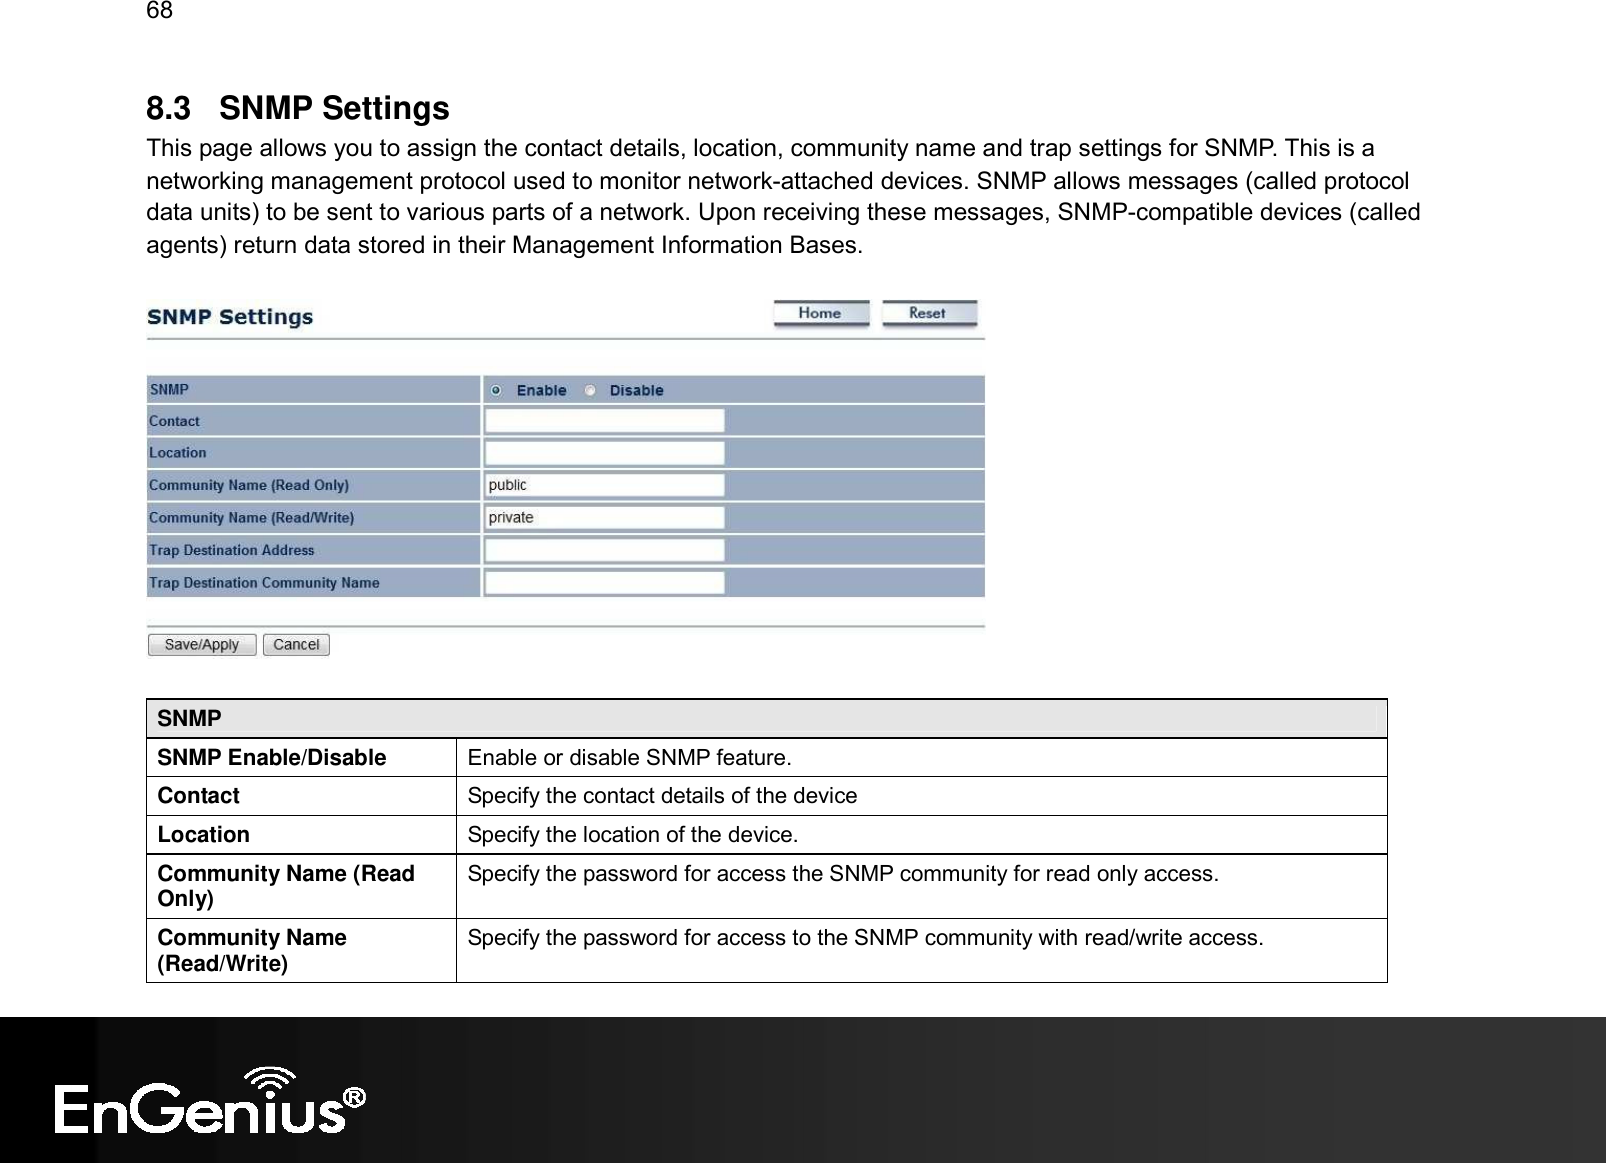 68  8.3  SNMP Settings This page allows you to assign the contact details, location, community name and trap settings for SNMP. This is a networking management protocol used to monitor network-attached devices. SNMP allows messages (called protocol data units) to be sent to various parts of a network. Upon receiving these messages, SNMP-compatible devices (called agents) return data stored in their Management Information Bases.     SNMP SNMP Enable/Disable  Enable or disable SNMP feature. Contact  Specify the contact details of the device Location  Specify the location of the device. Community Name (Read Only) Specify the password for access the SNMP community for read only access. Community Name (Read/Write) Specify the password for access to the SNMP community with read/write access. 